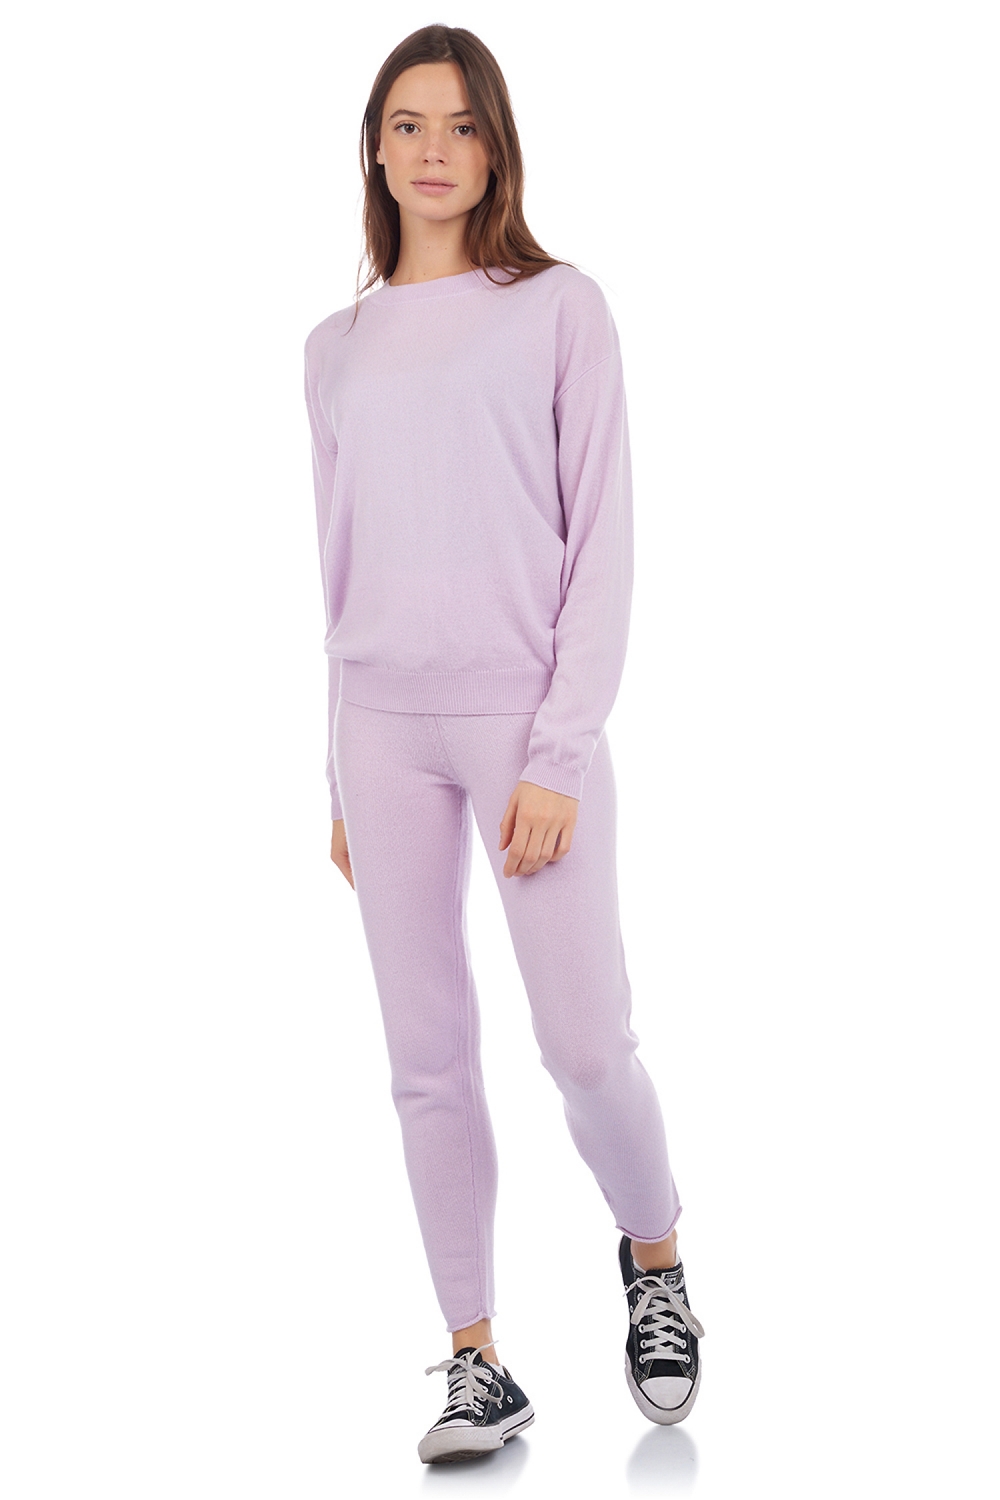 Cachemire pull femme arth lilas s